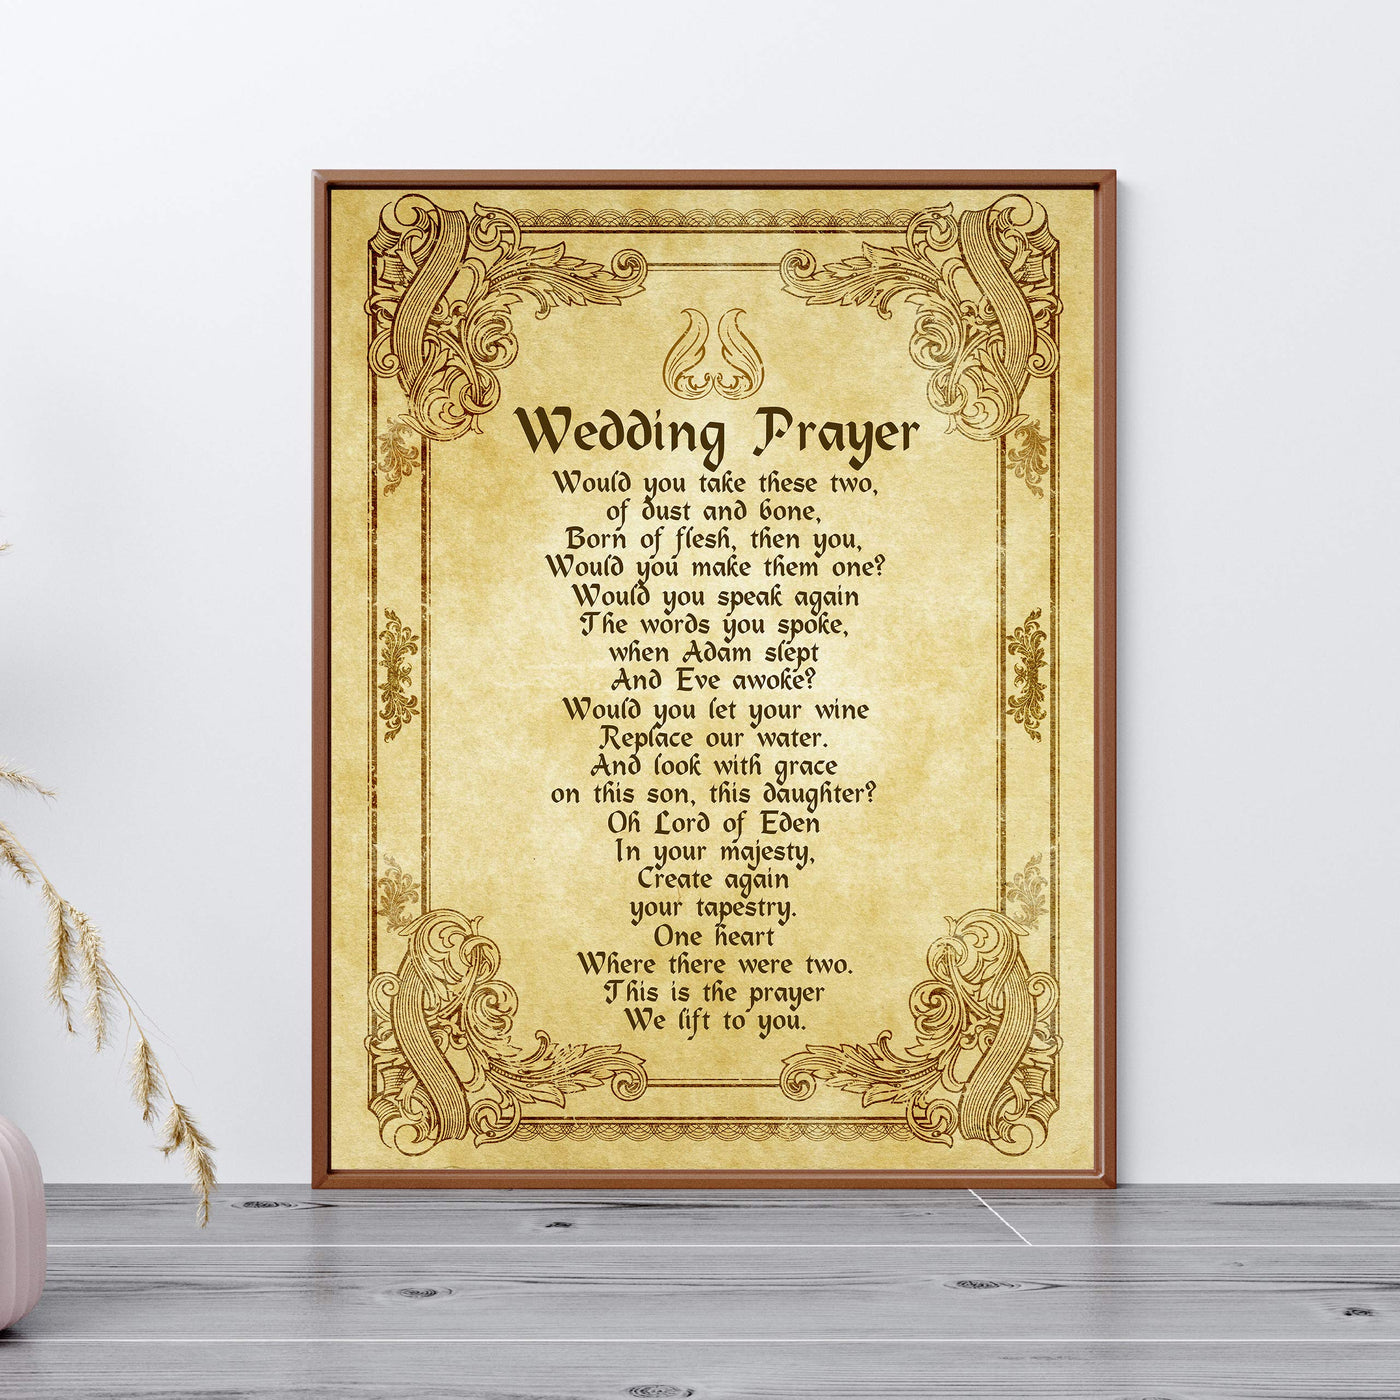 Wedding Prayer-Vintage-Poetic Wall Art -11 x 14" Love and Marriage Poem Print w/Distressed Parchment Design -Ready to Frame. Perfect for Spouse-Newlywed-Life Partners. Great Gift for New Couples!